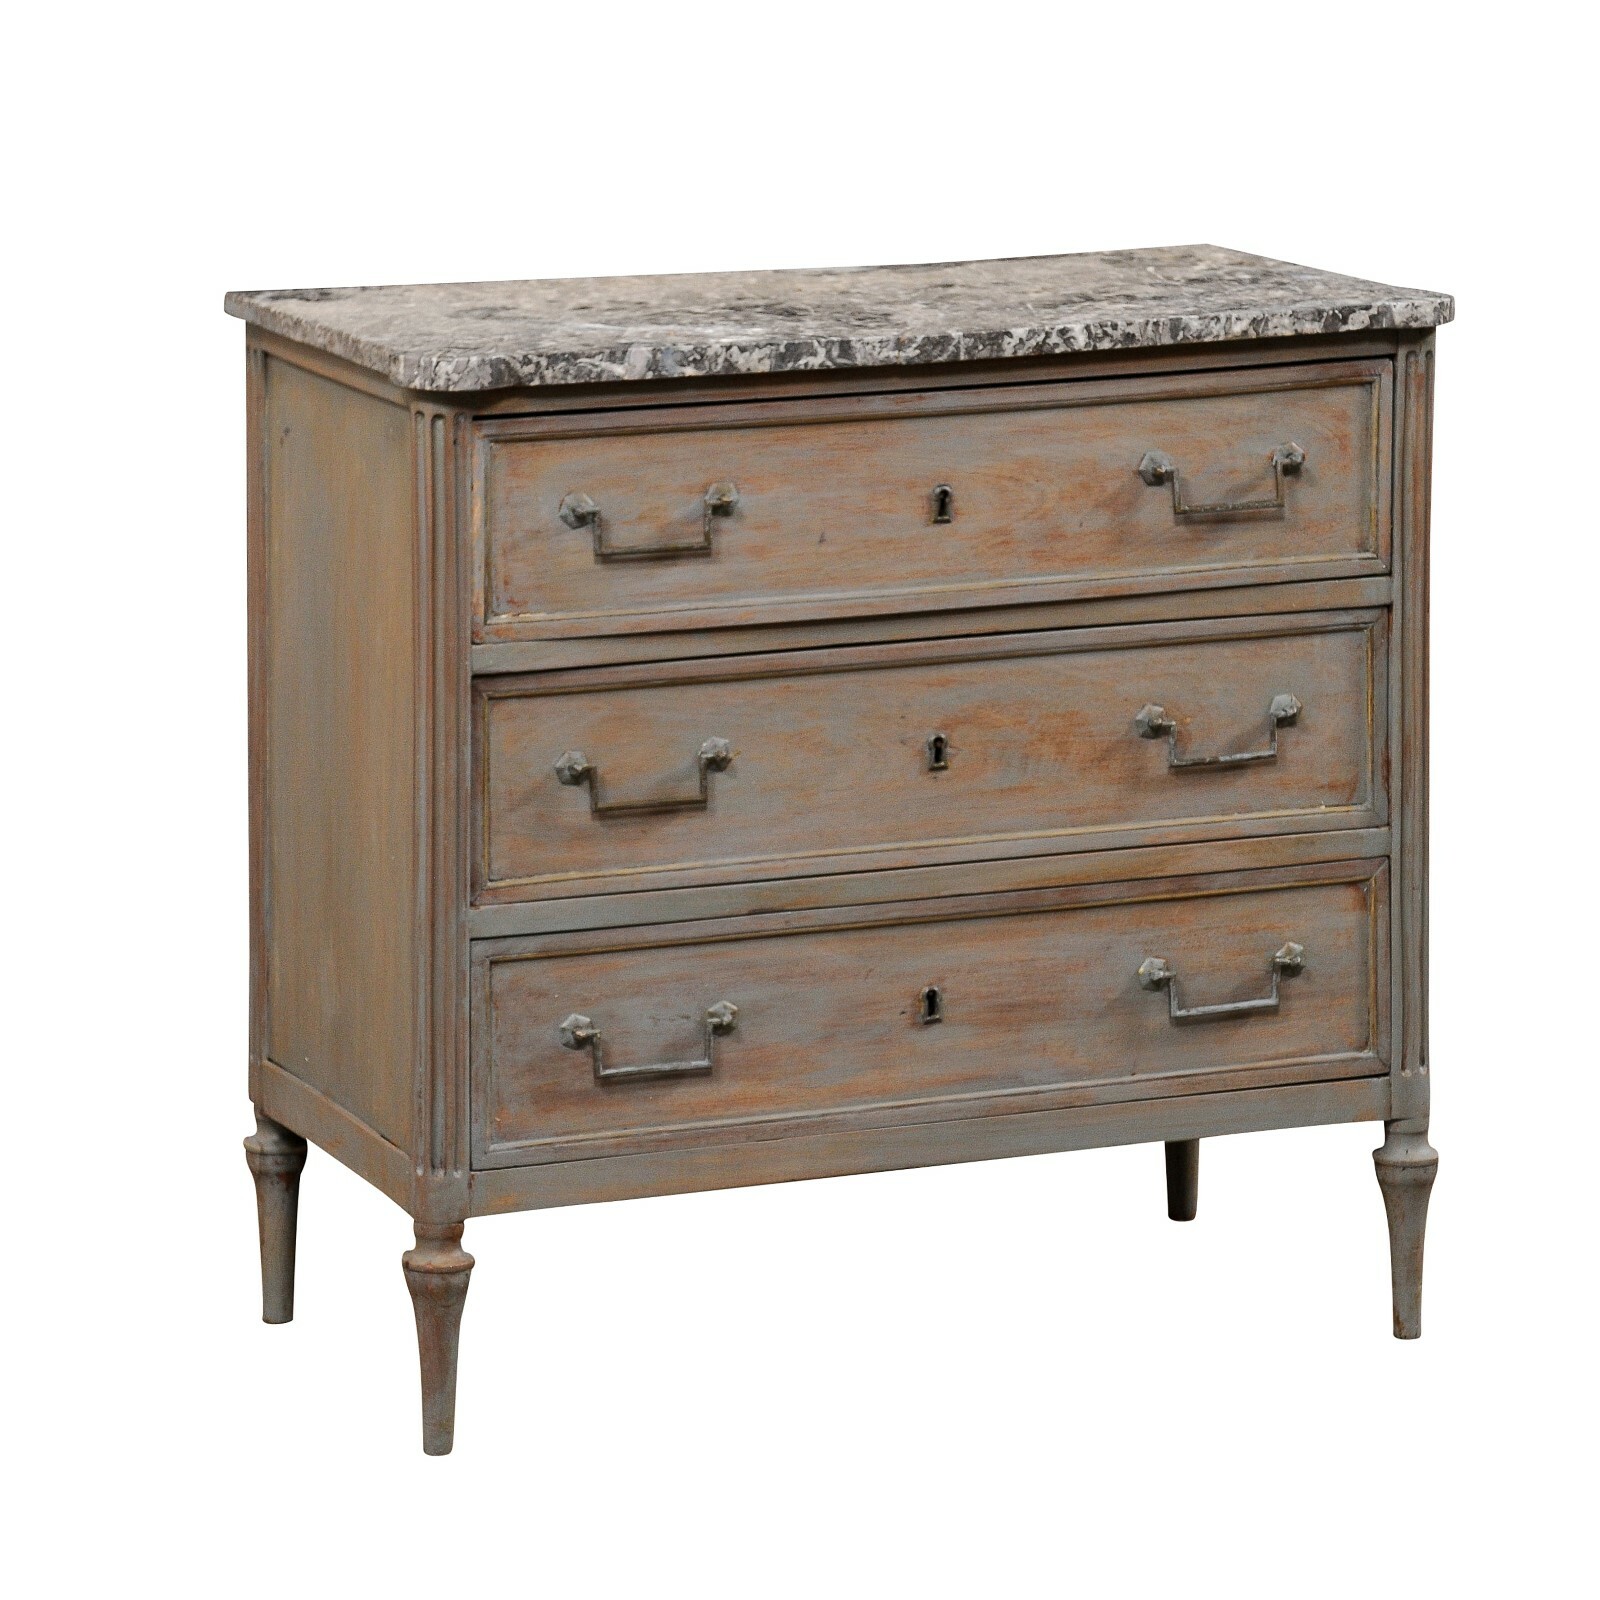 French Neoclassic Period Marble Top Commode